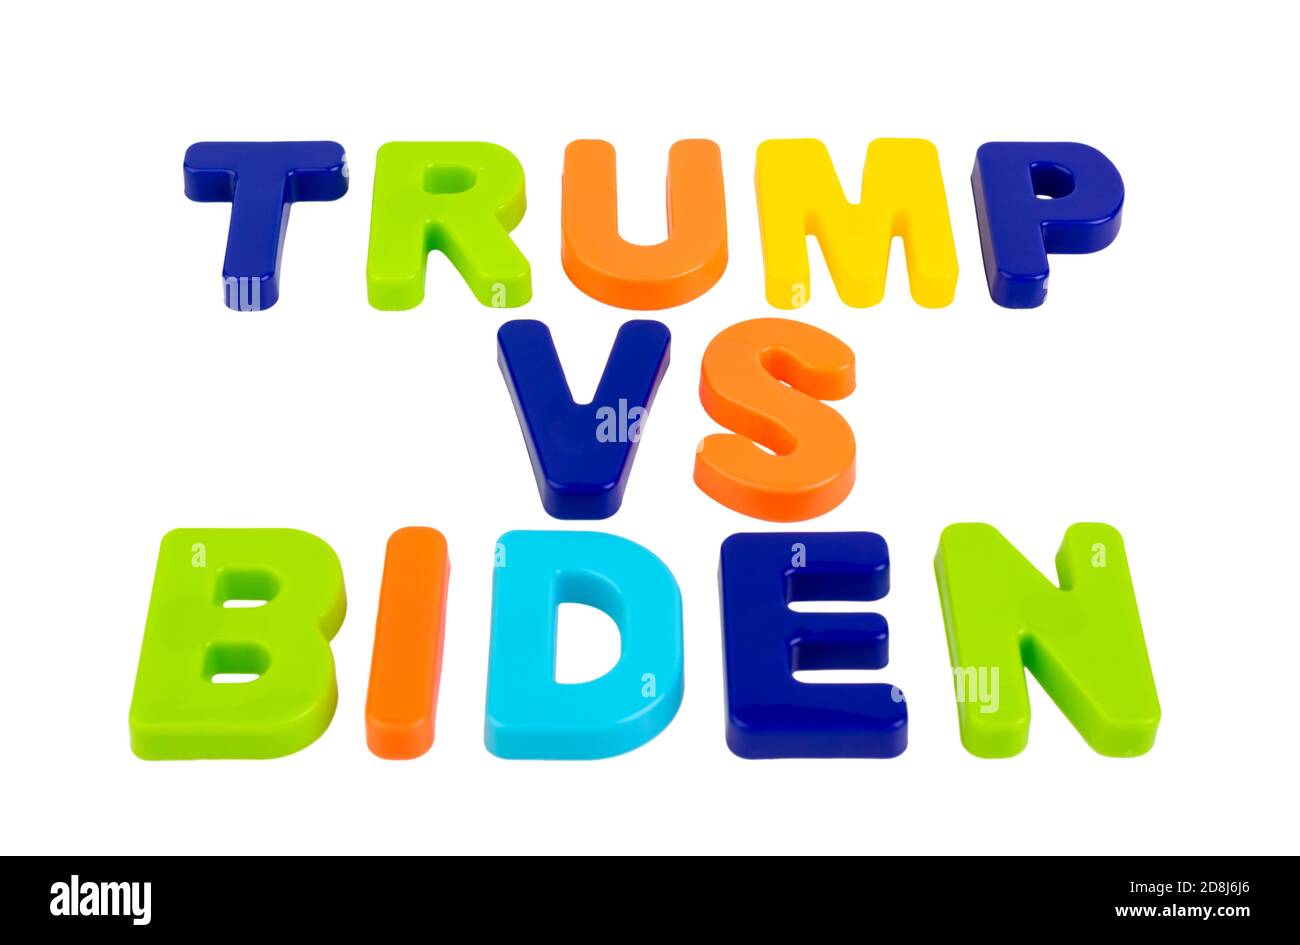 Who Will Become the New President of the United States? Trump or Biden? The names of the presidential candidates written in plastic letters on a white Stock Photo